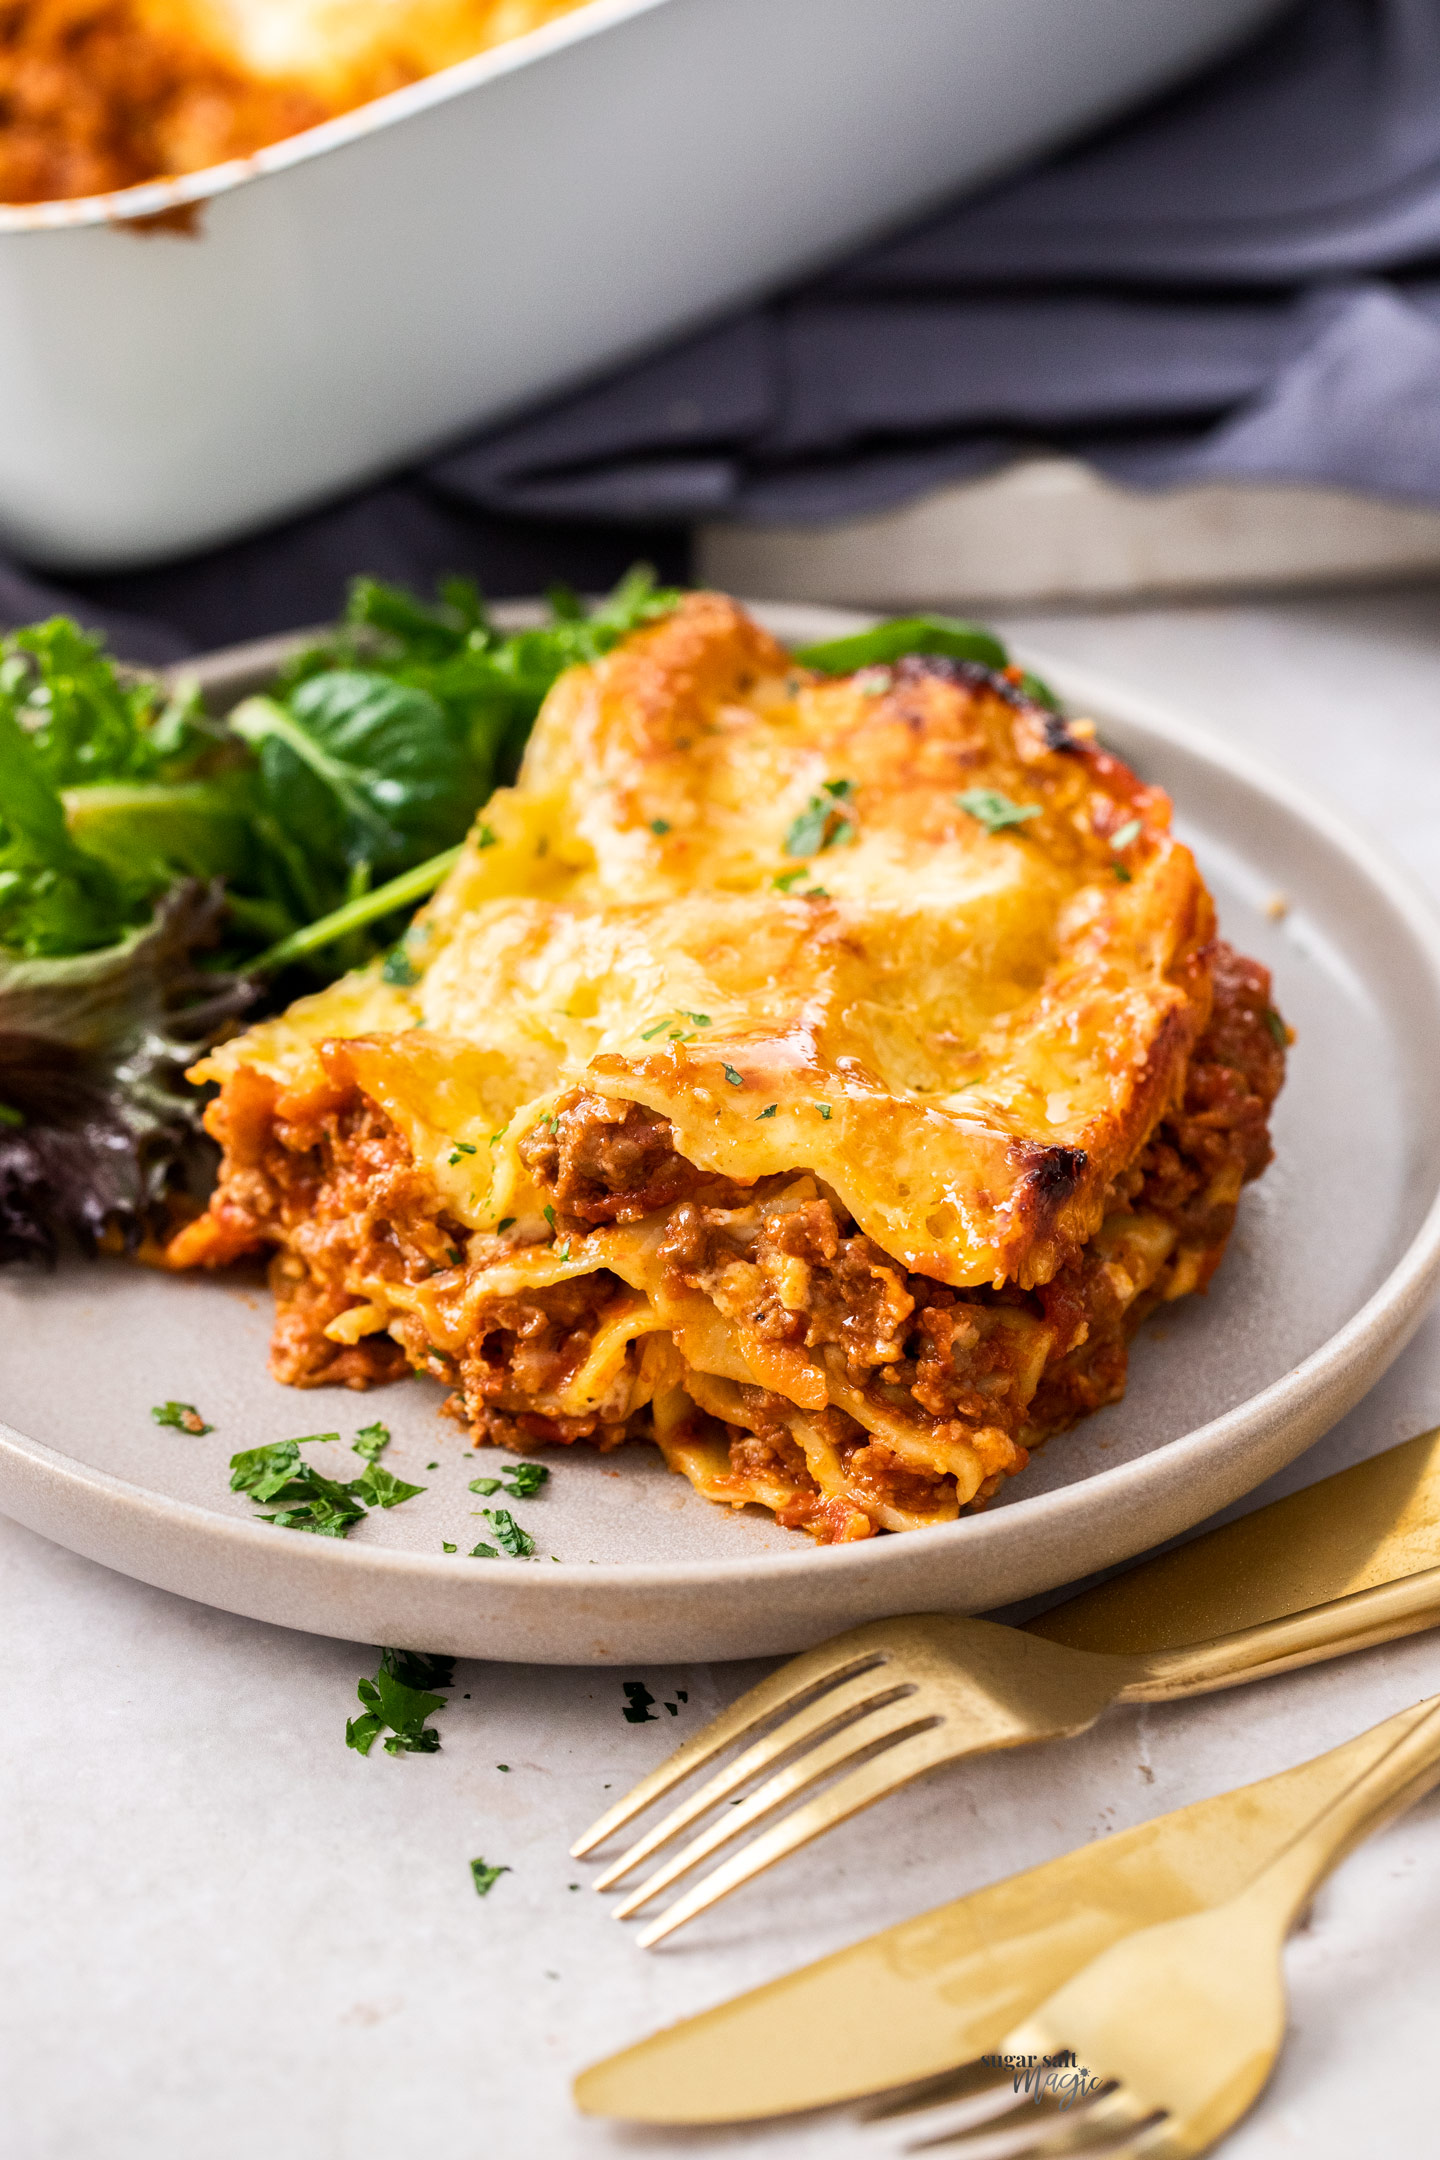 A slice of lasagna on a plate with salad.